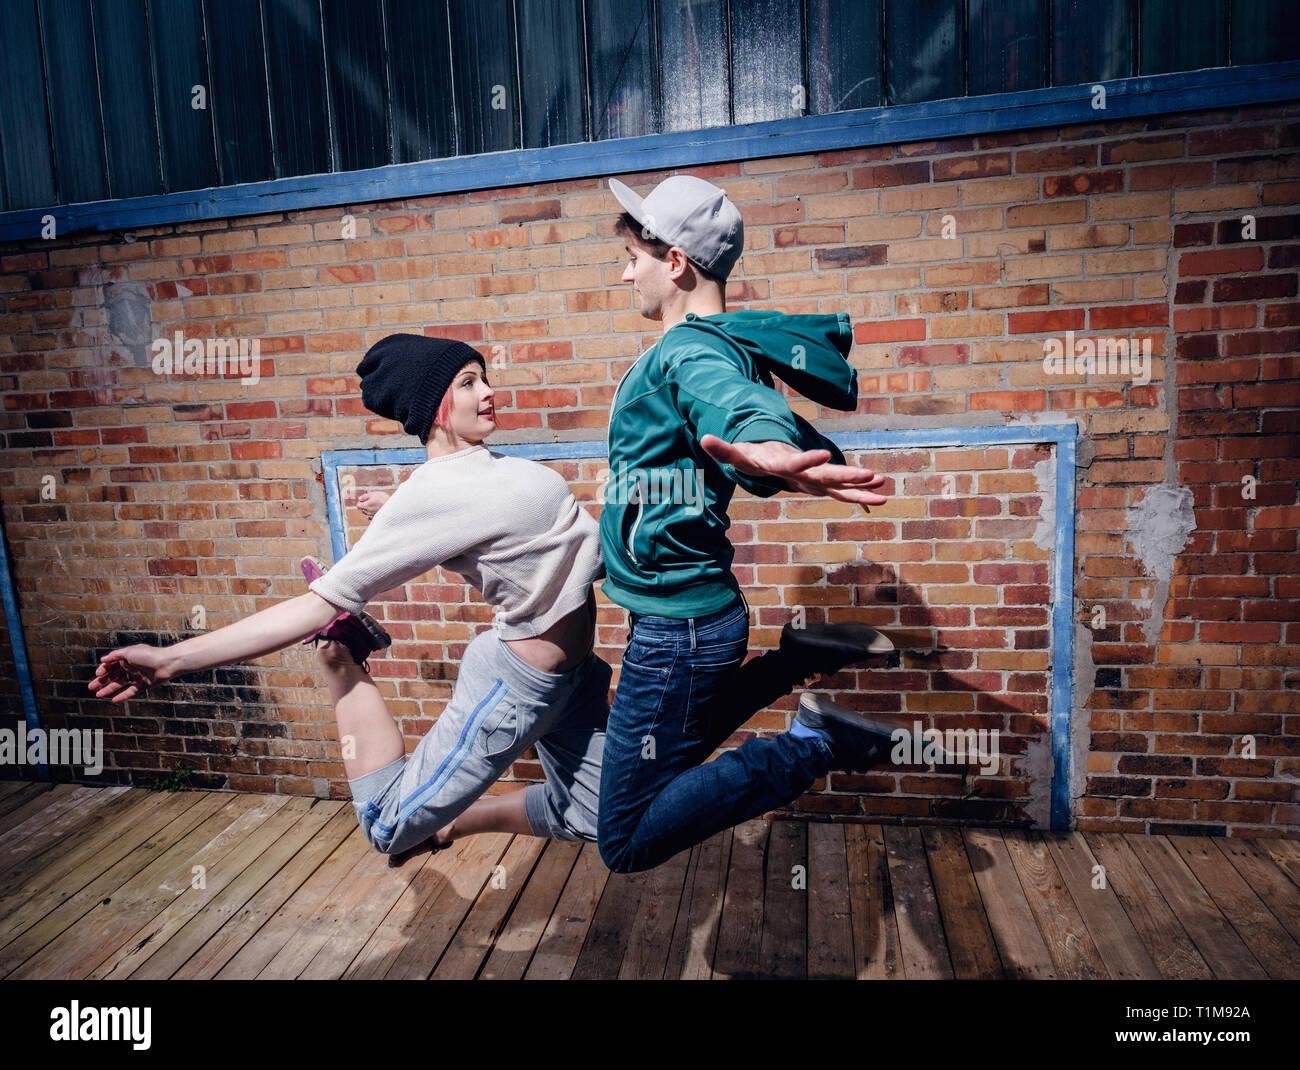 Modern dancers performing against brick wall Stock Photo